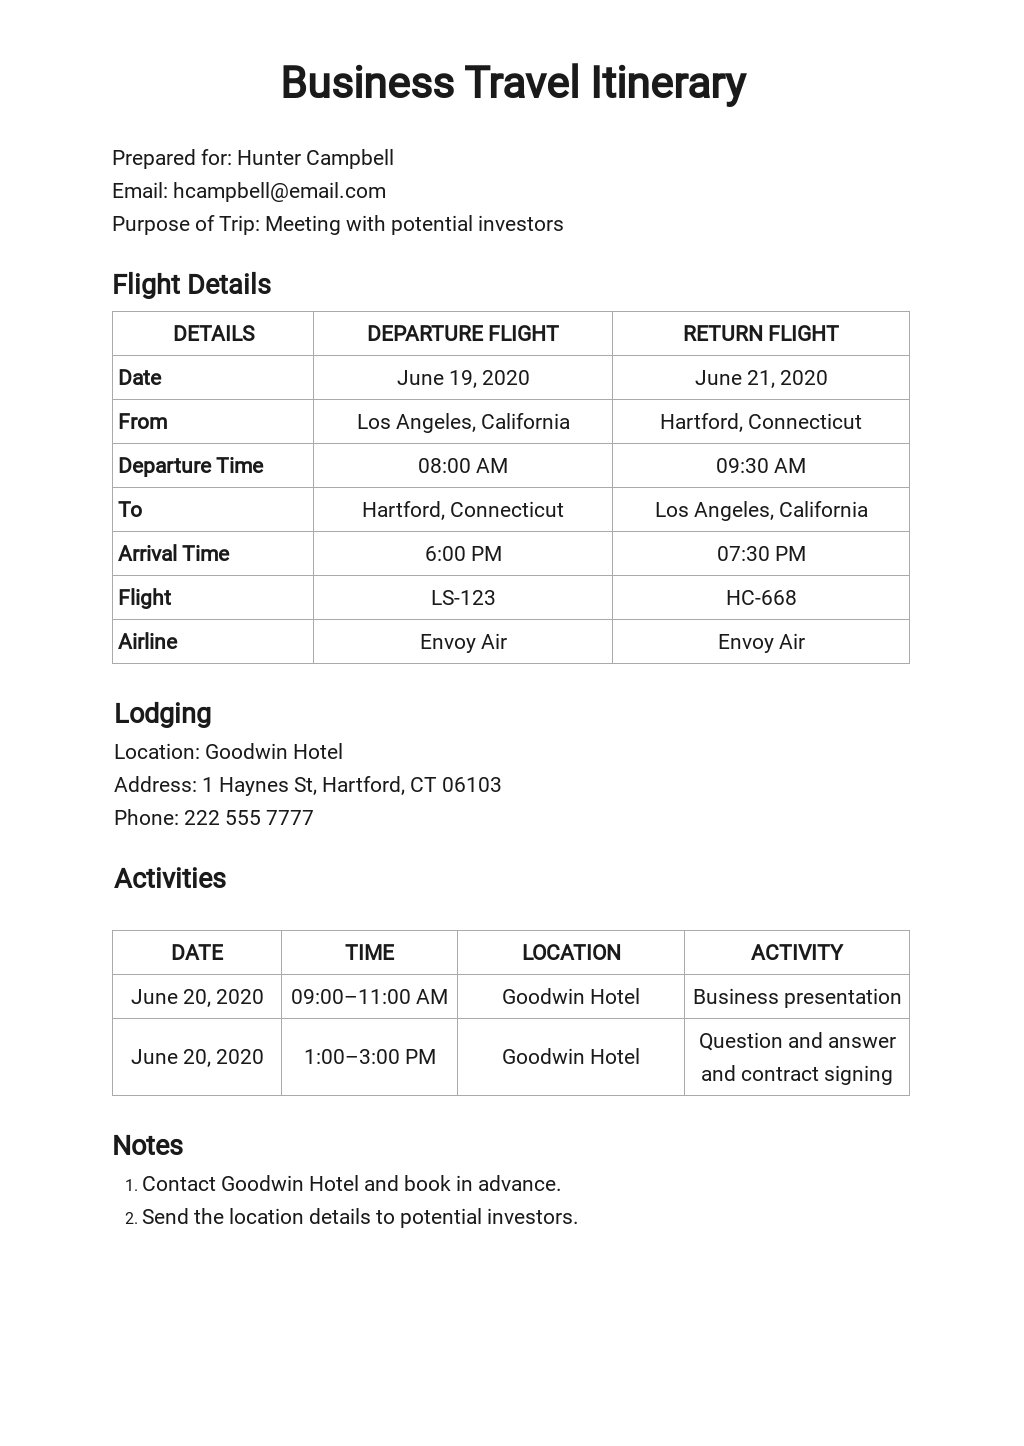 business trip itinerary example